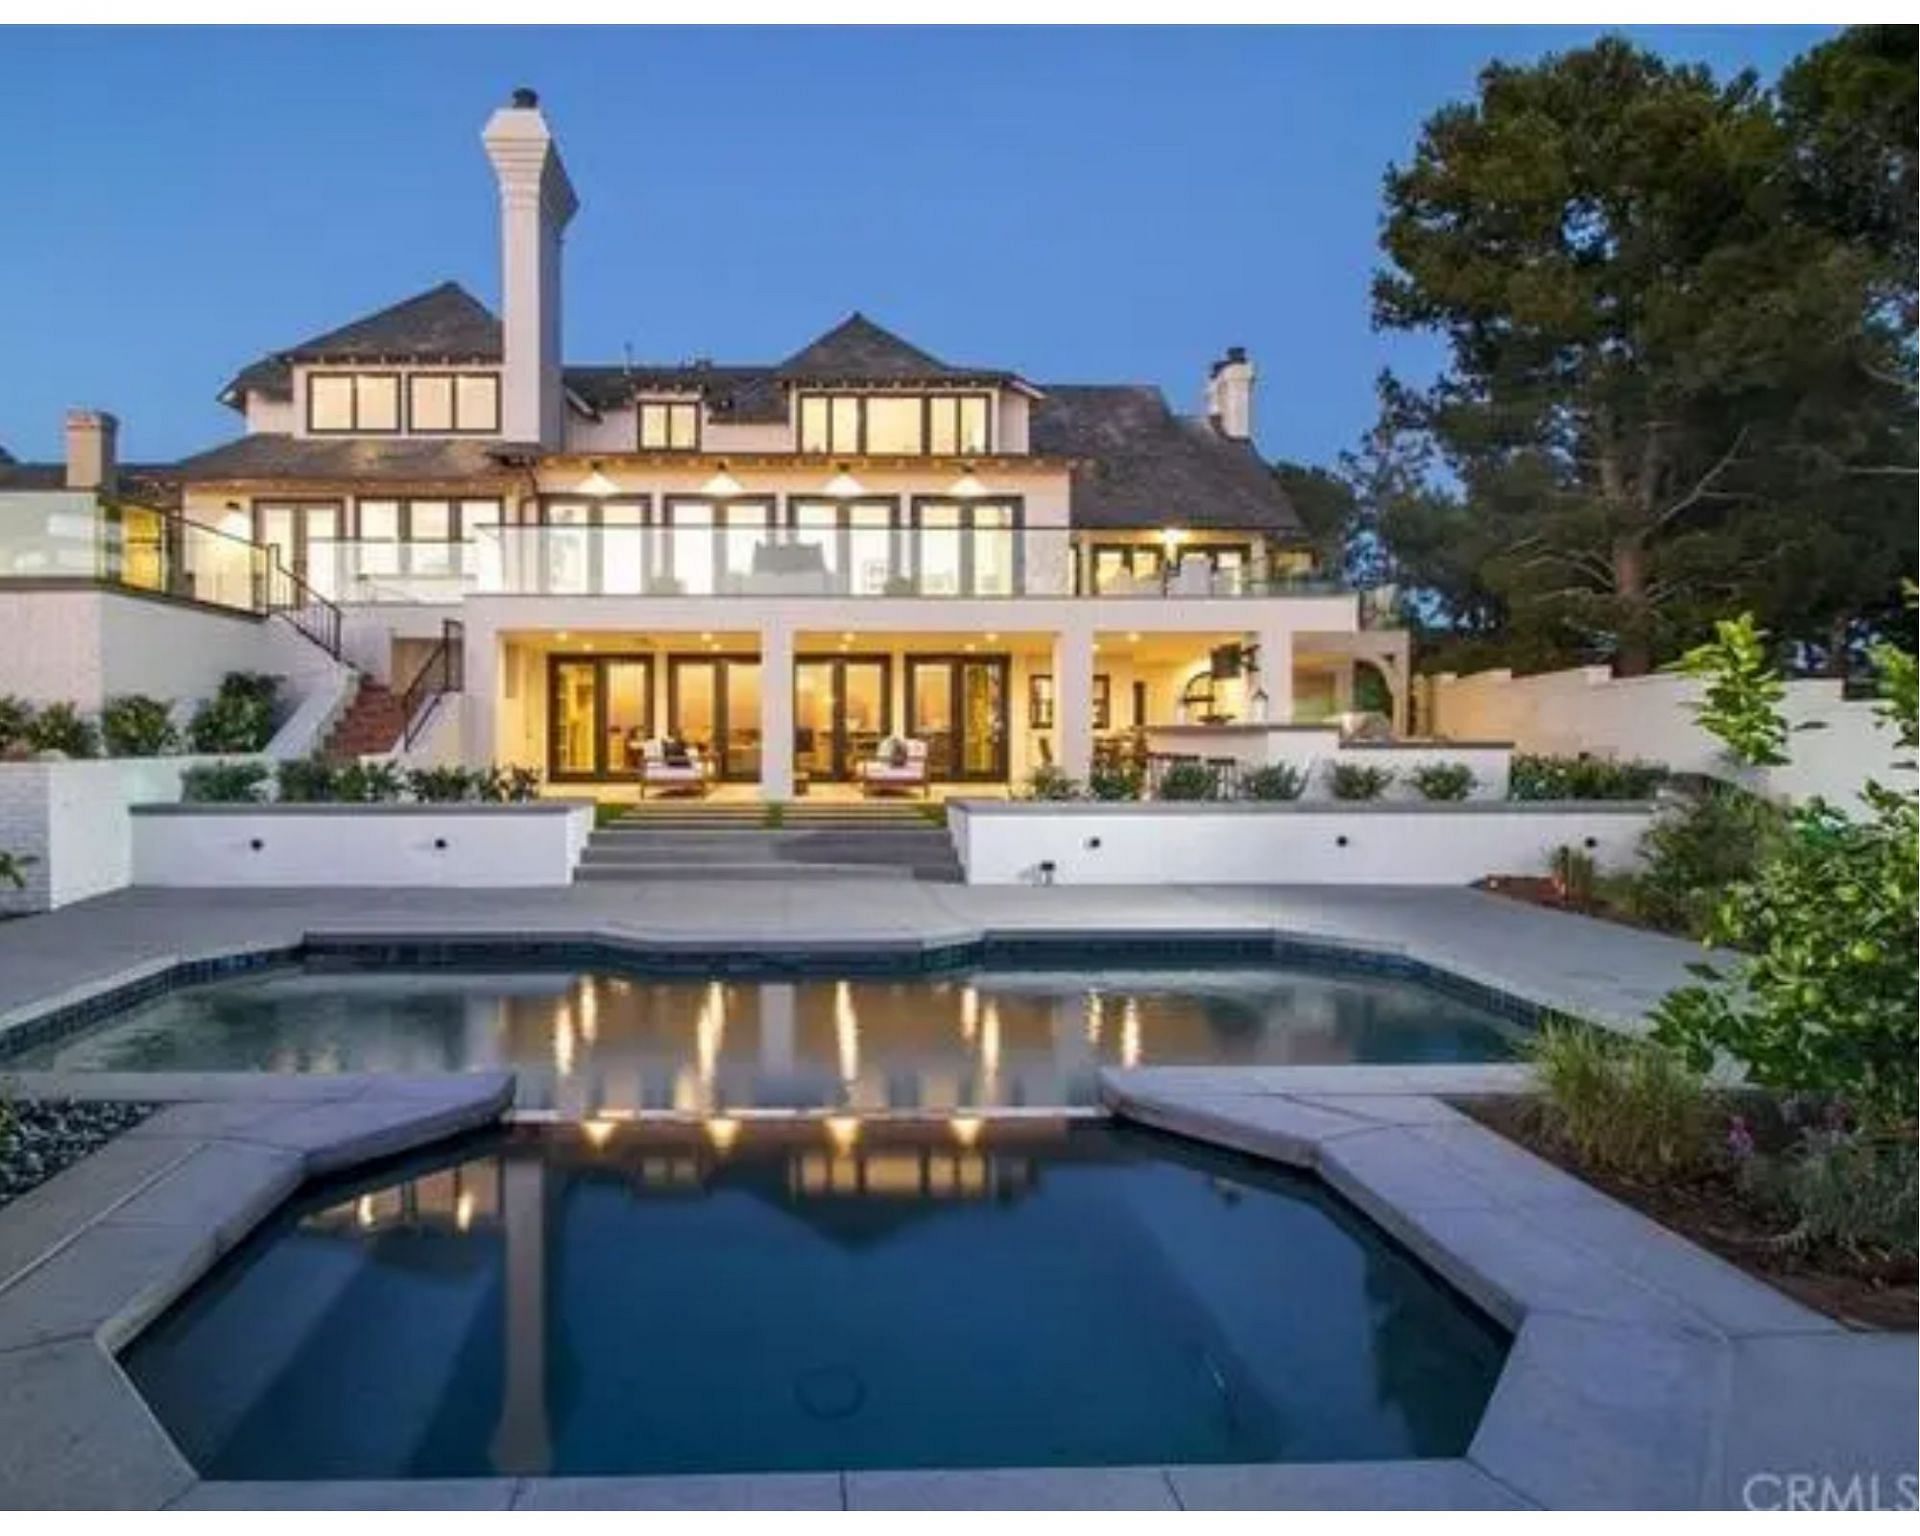 Mike Trout&#039;s mansion in California. Photos courtesy of Dirt.